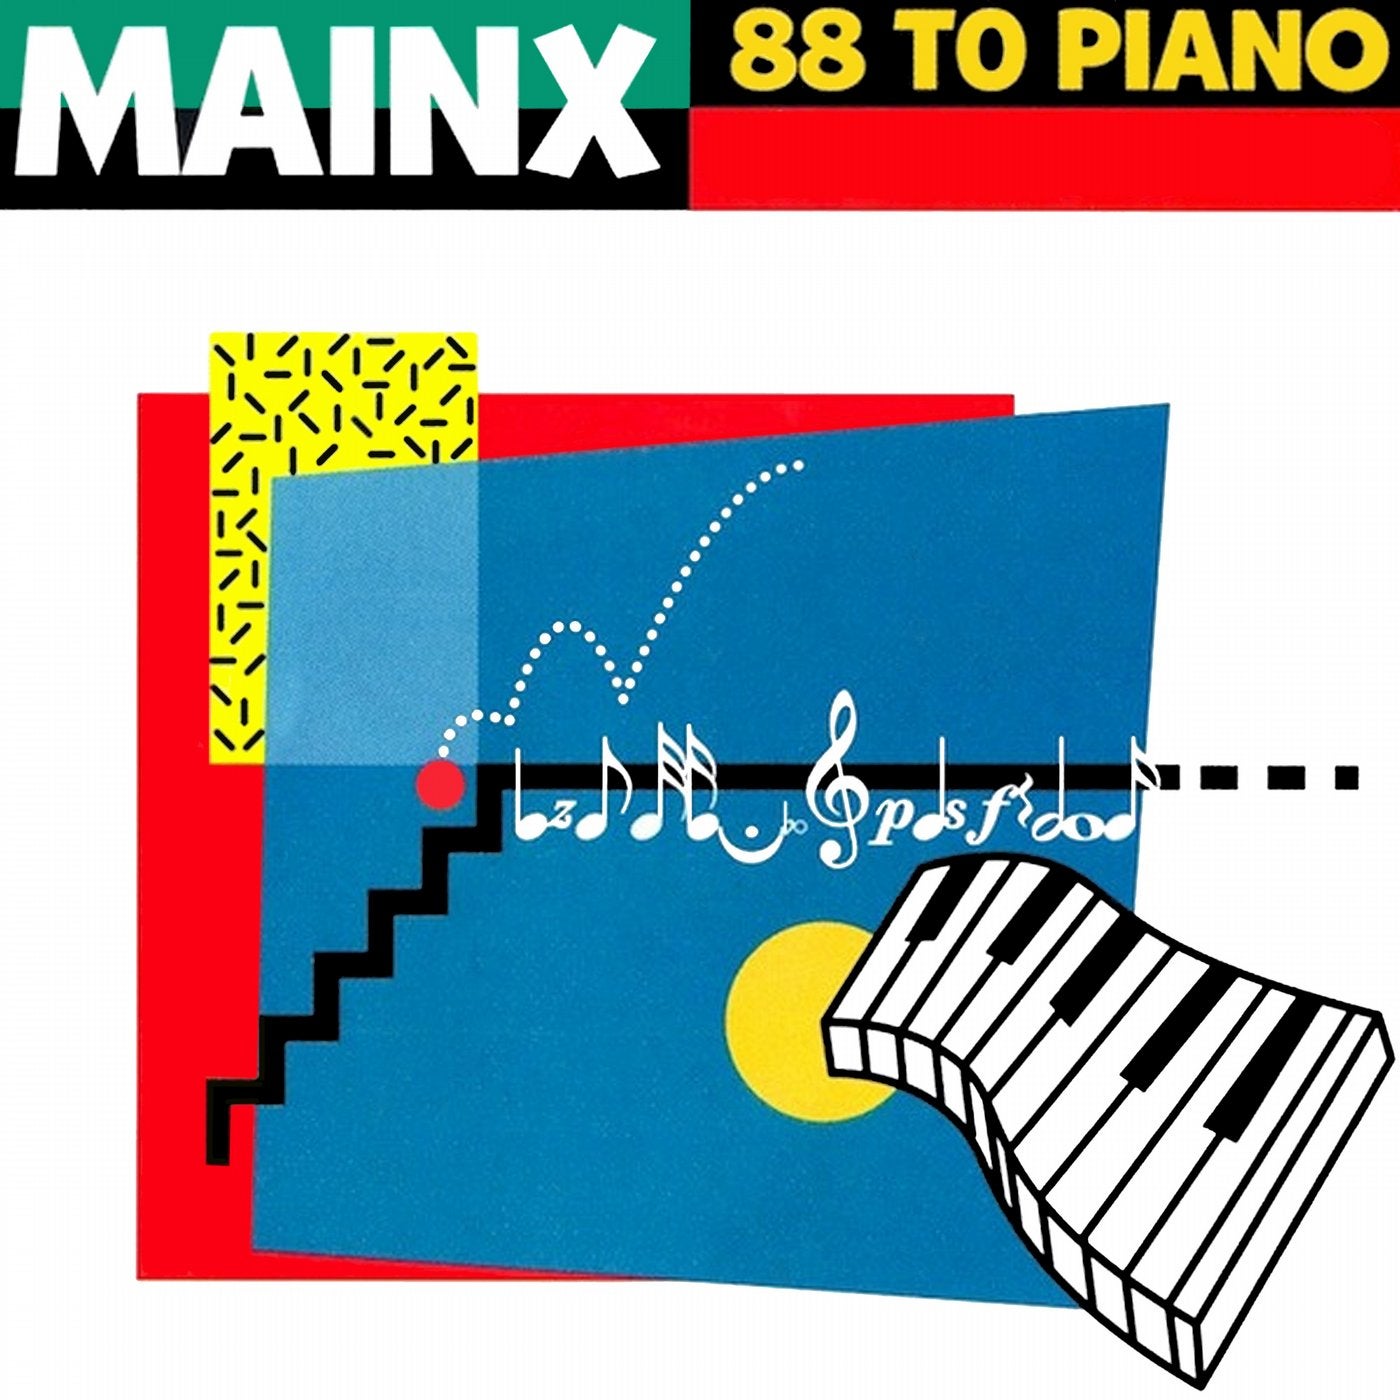 88 To Piano